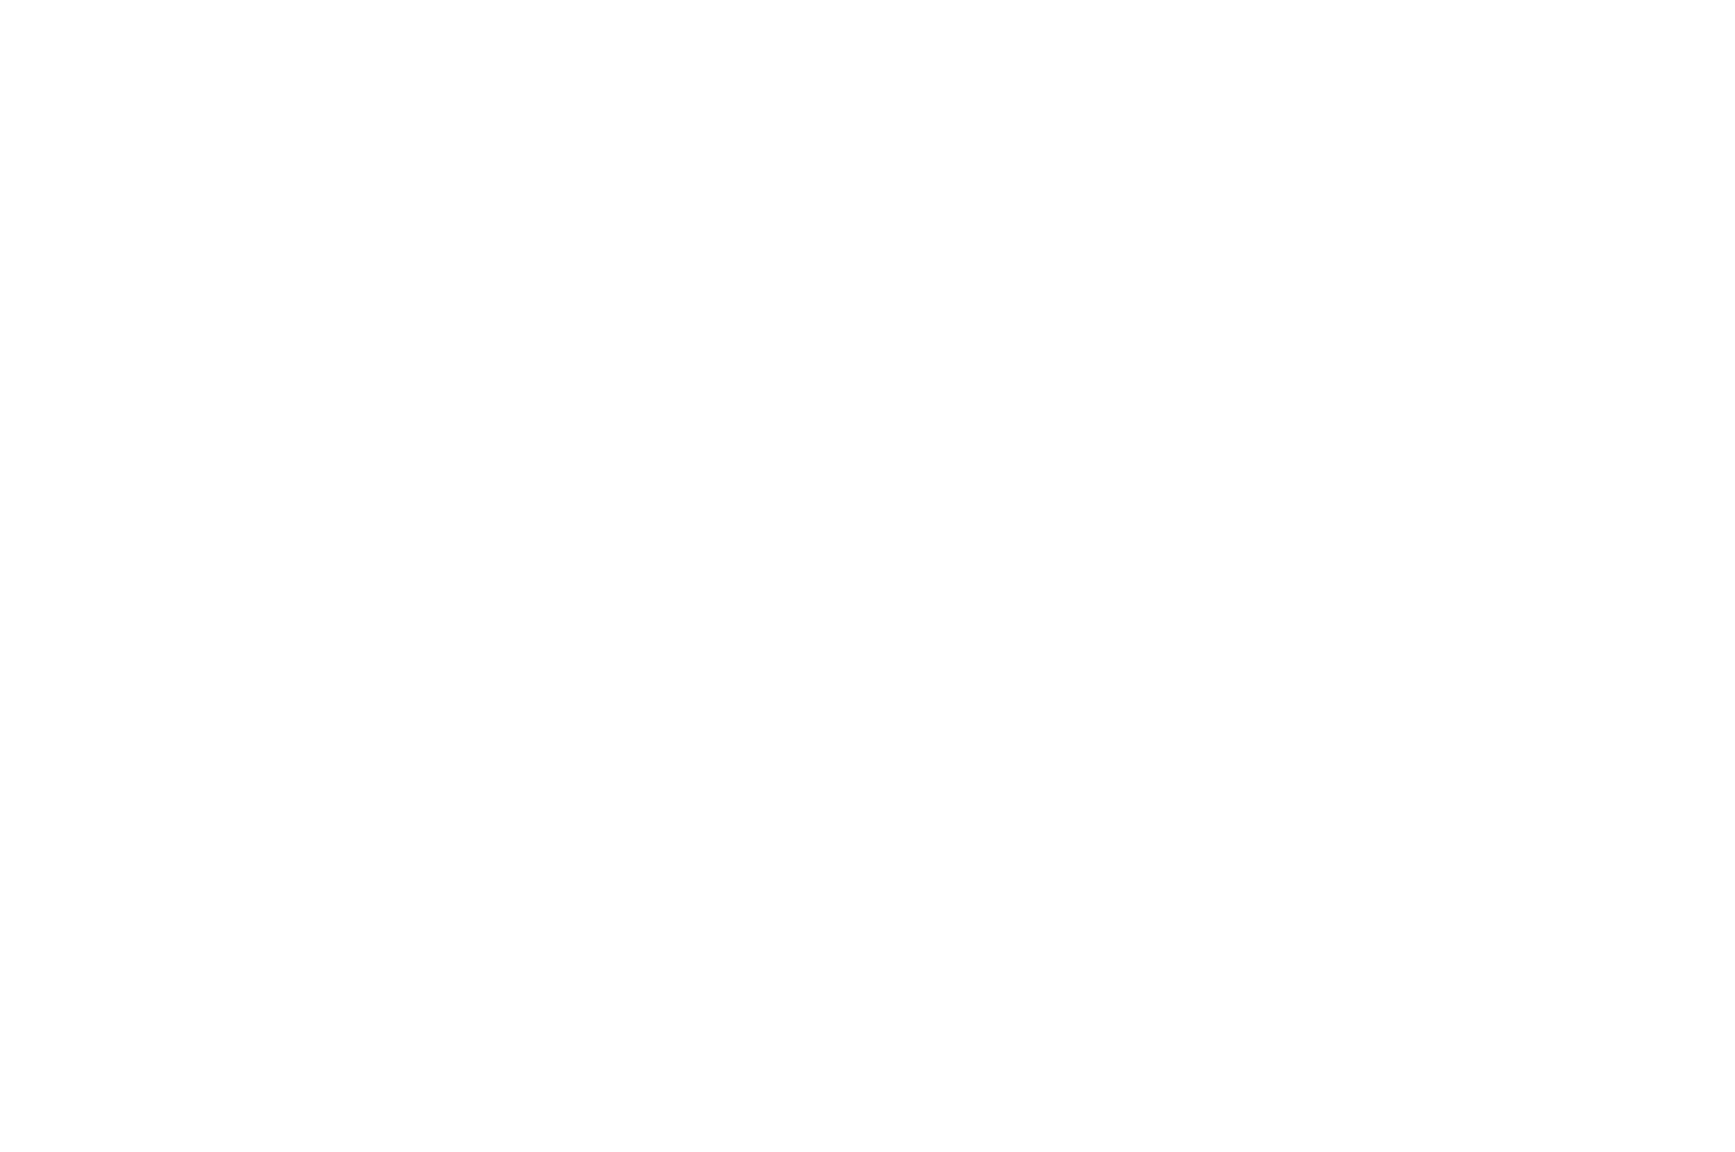 OFFICIAL SELECTION - SAINTS AND SINNERS FILM FESTIVAL - 2020.png